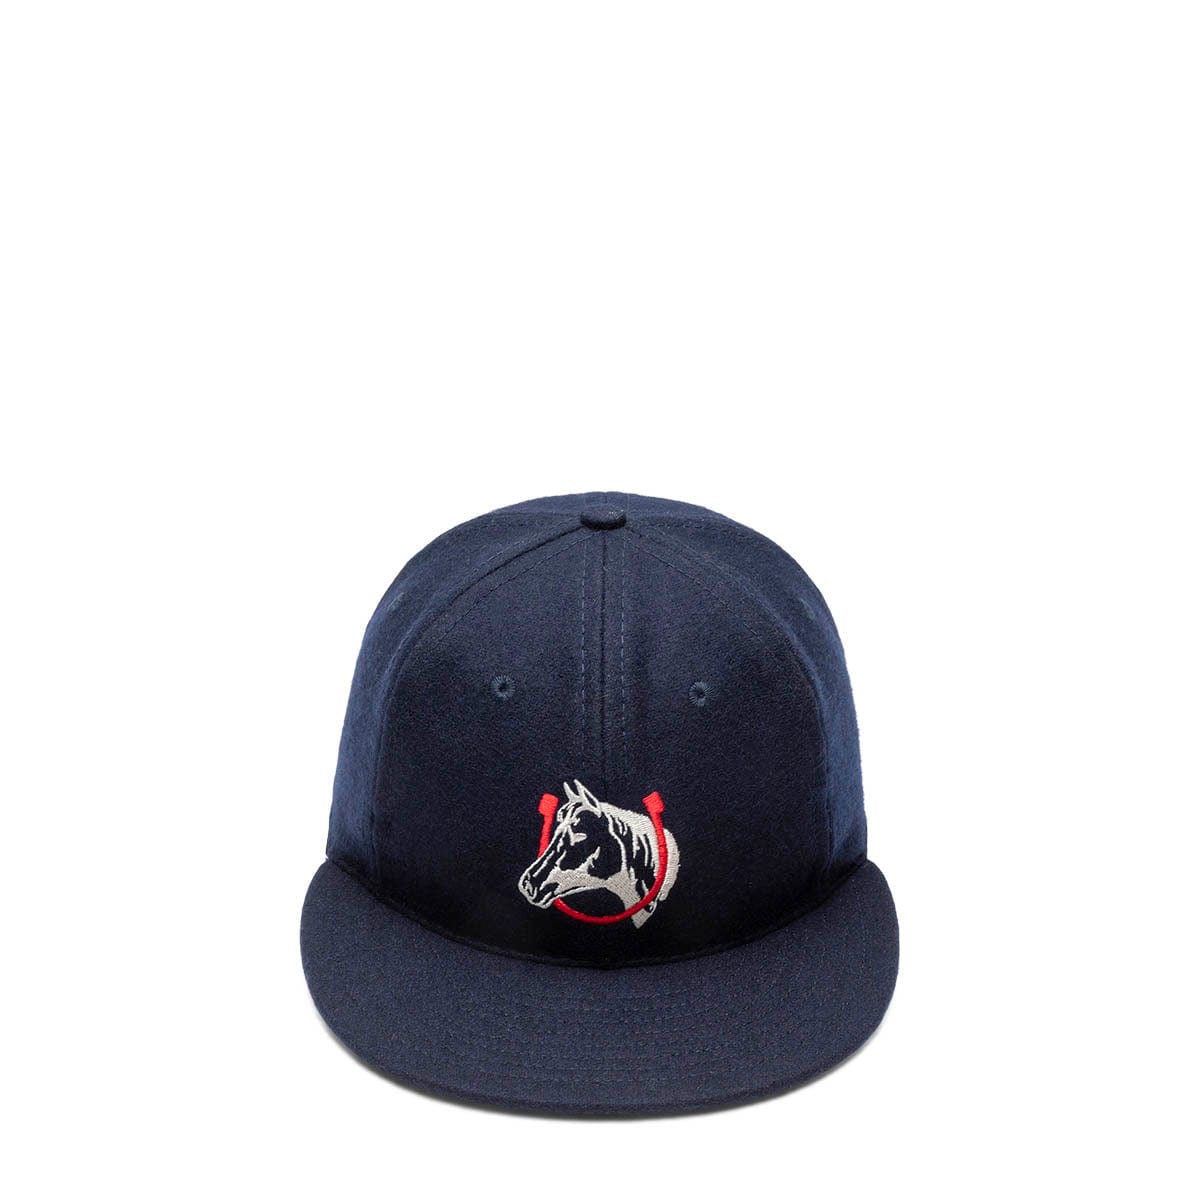 Ebbets Accessories - HATS - Snapback-Fitted Hat NAVY / O/S EBBETS HAT